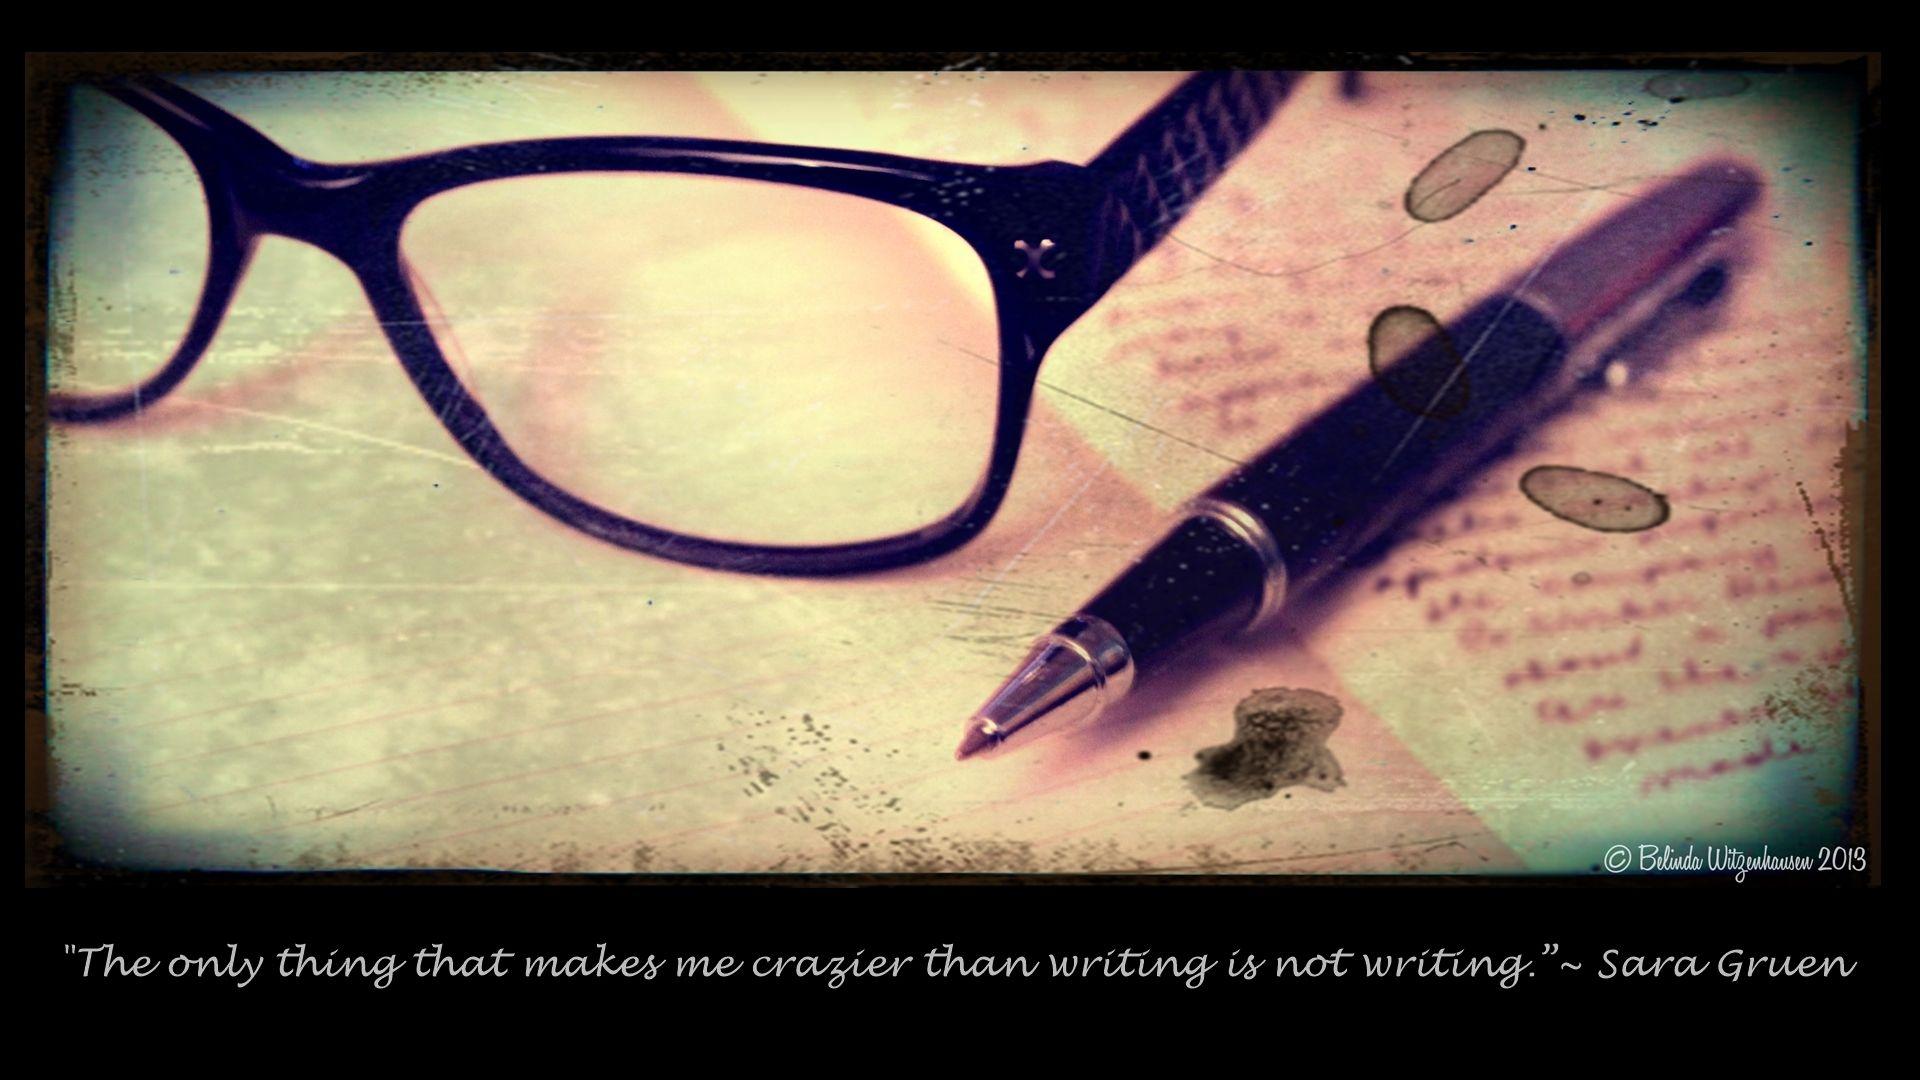 Wednesday Wallpaper for Writers October 30th, 2013